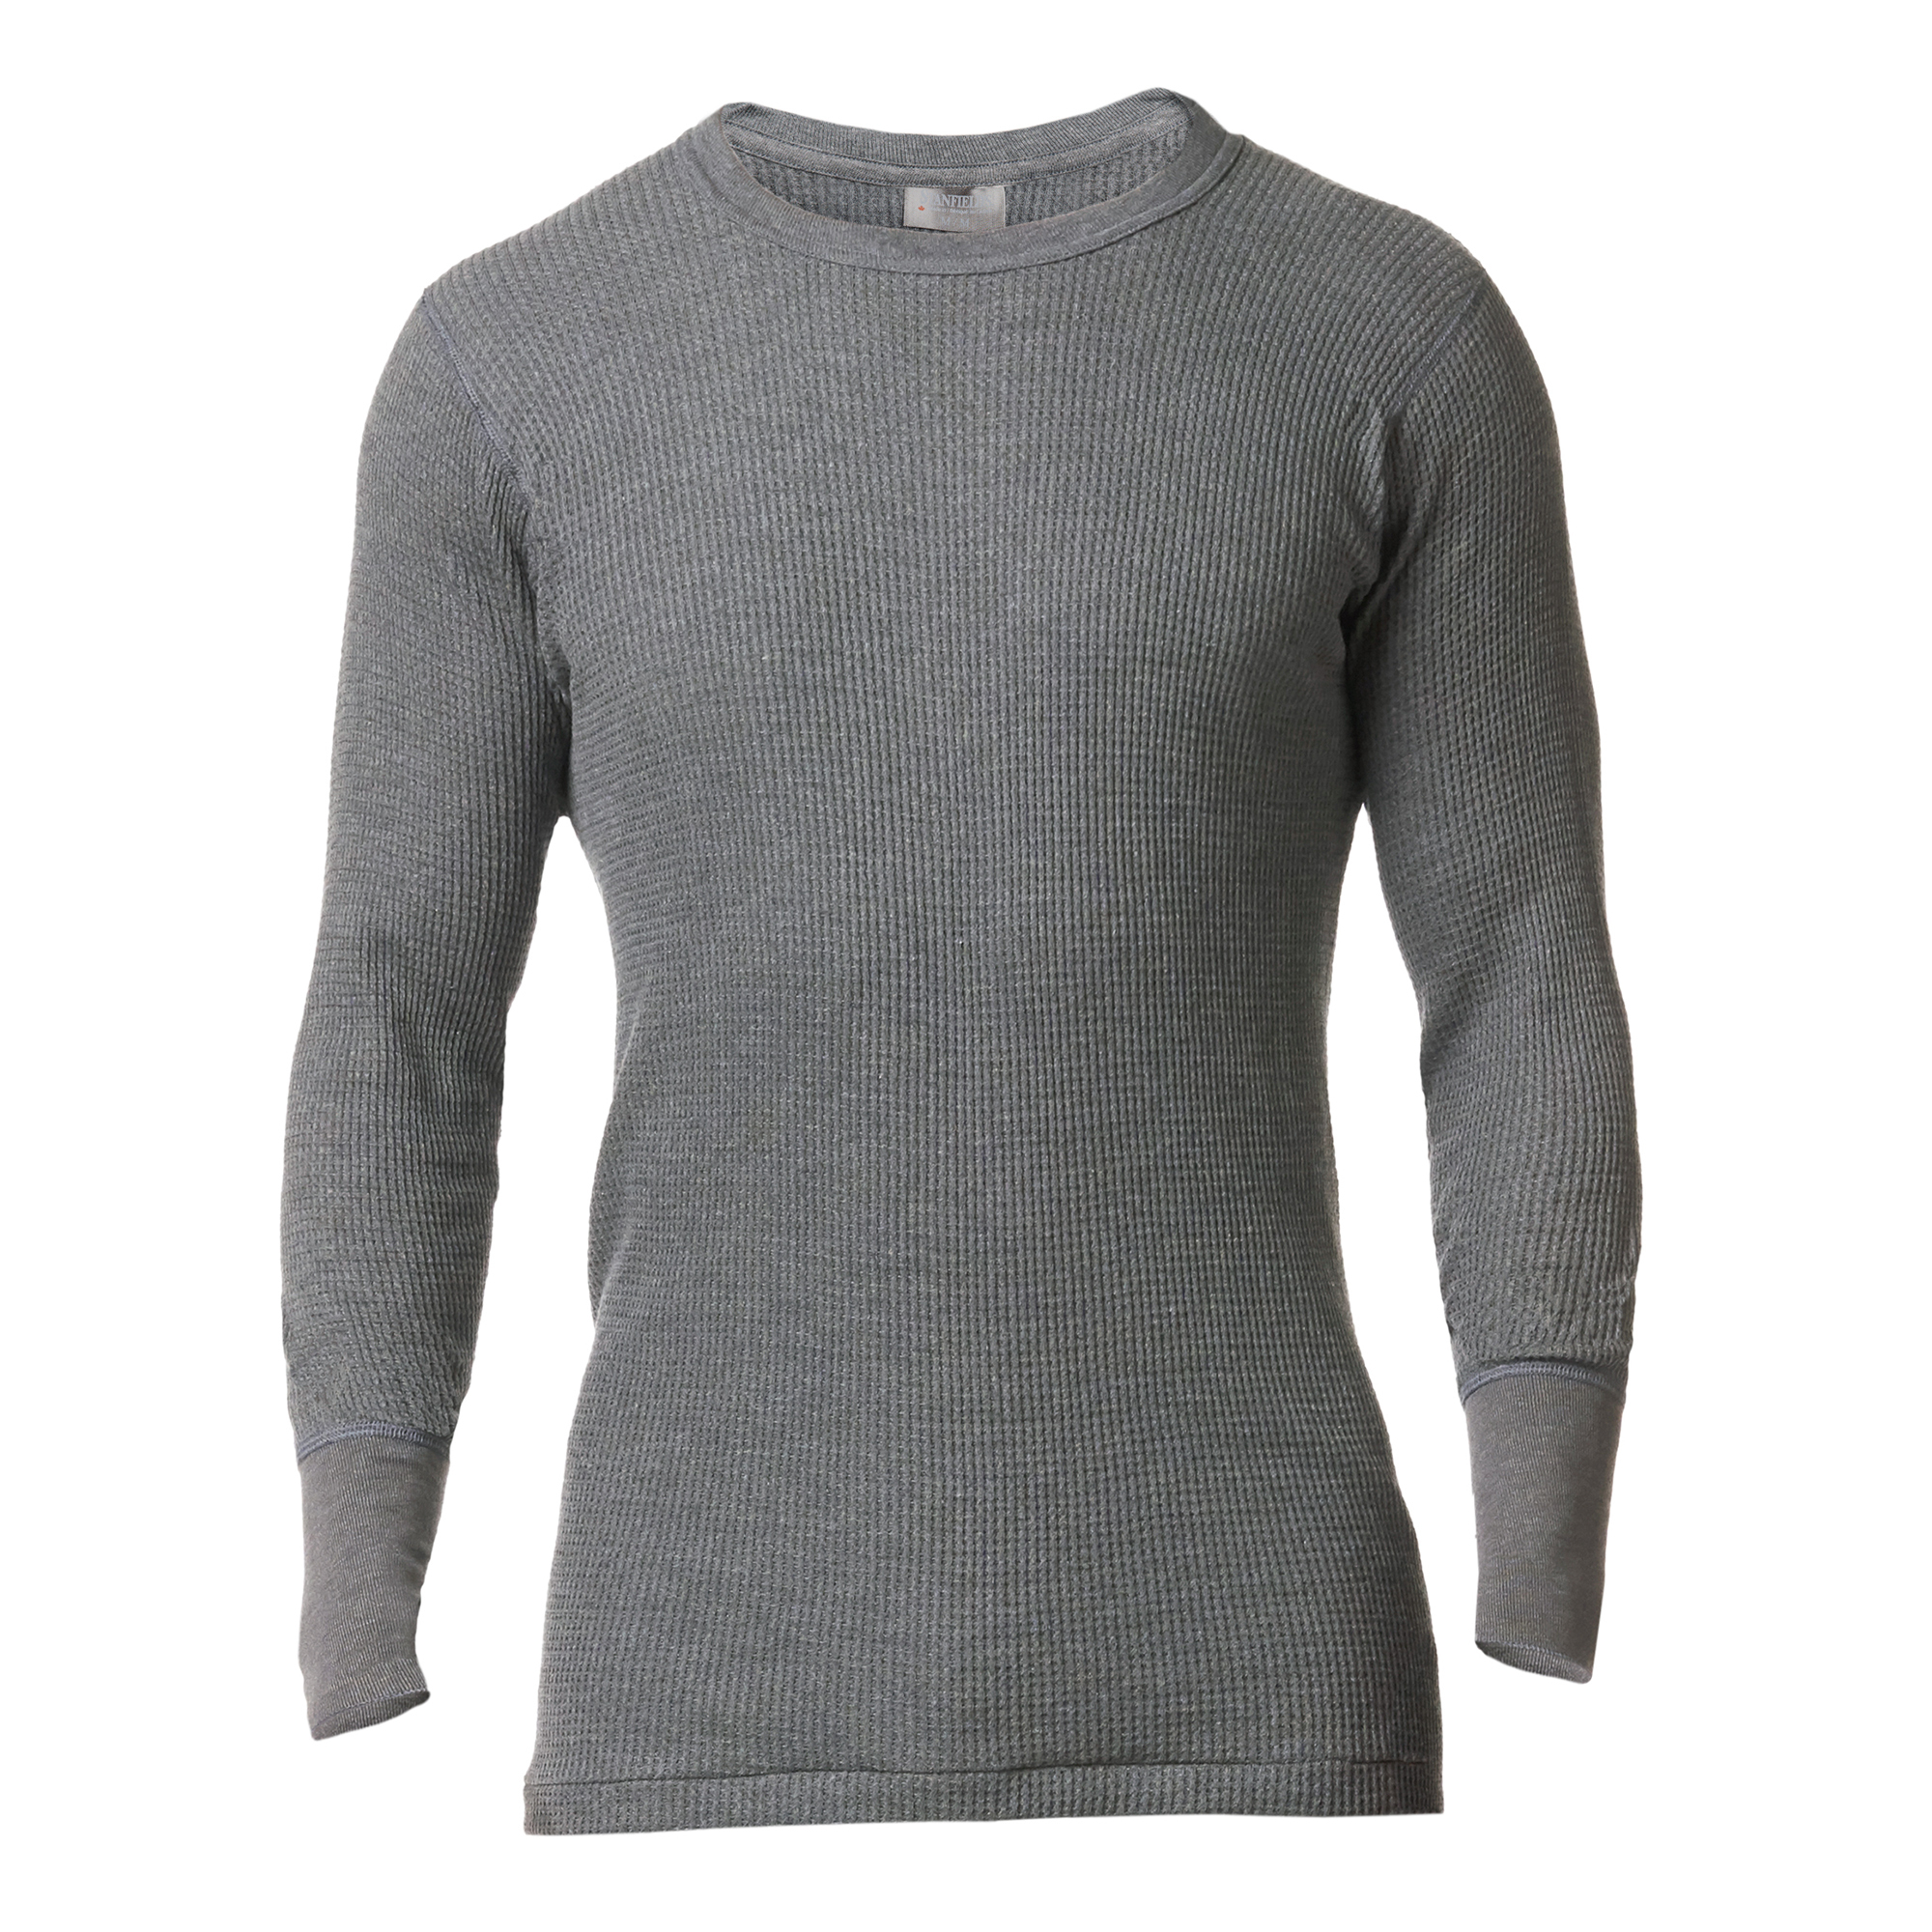 Stanfield's, Men's Thermal Waffle Knit Long Sleeve Shirt, Size M, Color  CHARCOAL MIX, Model# 6623-Charcoal Mix-M